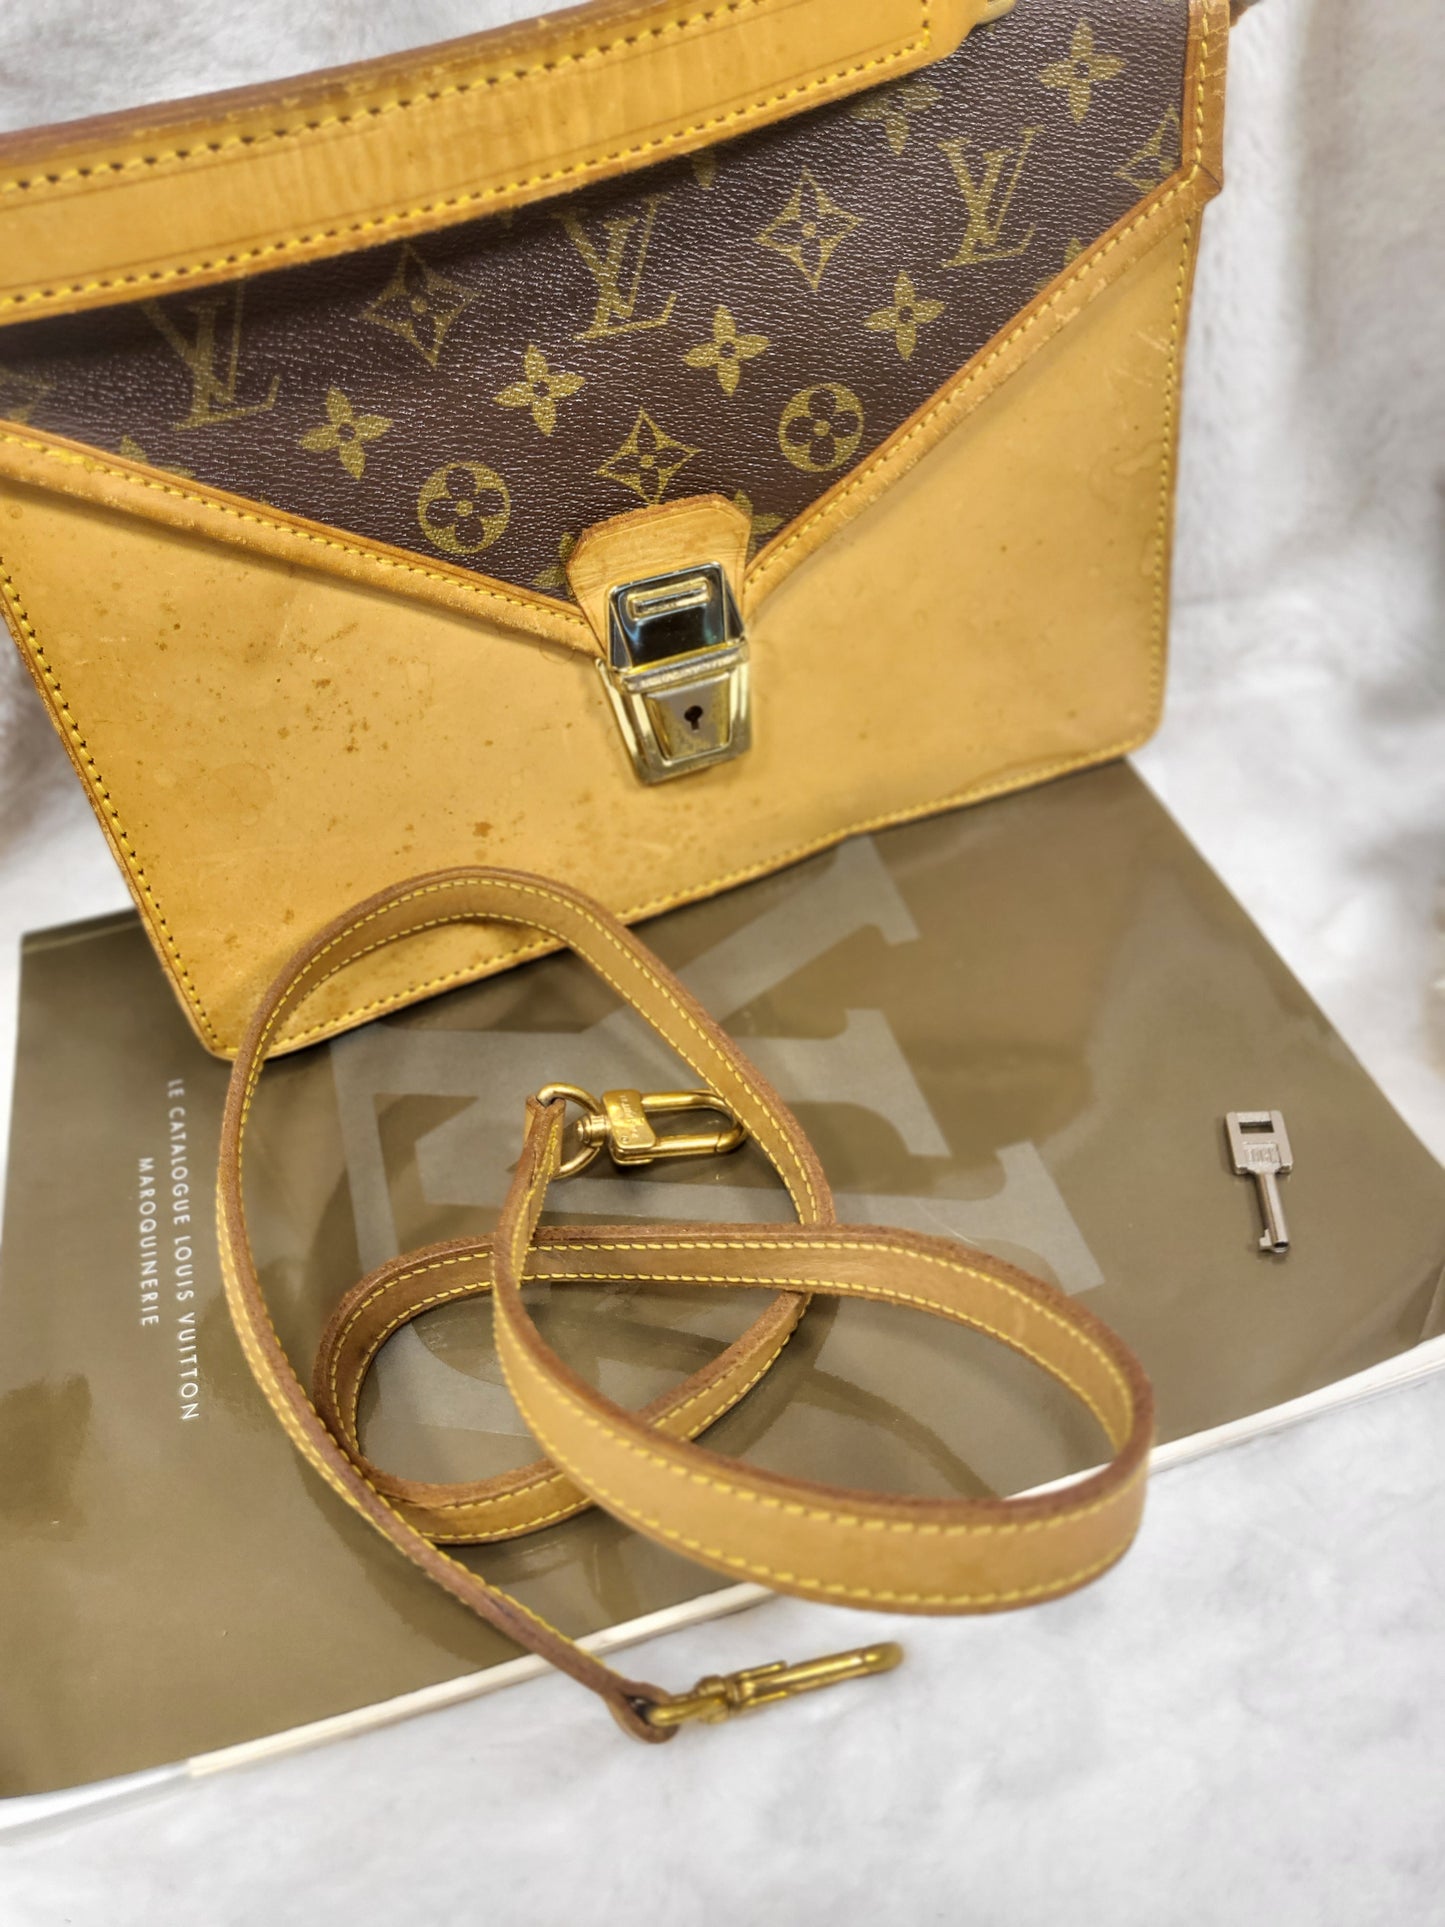 Authentic pre-owned Louis Vuitton sac biface calfskin hinomoto limited edition crossbody shoulder bag